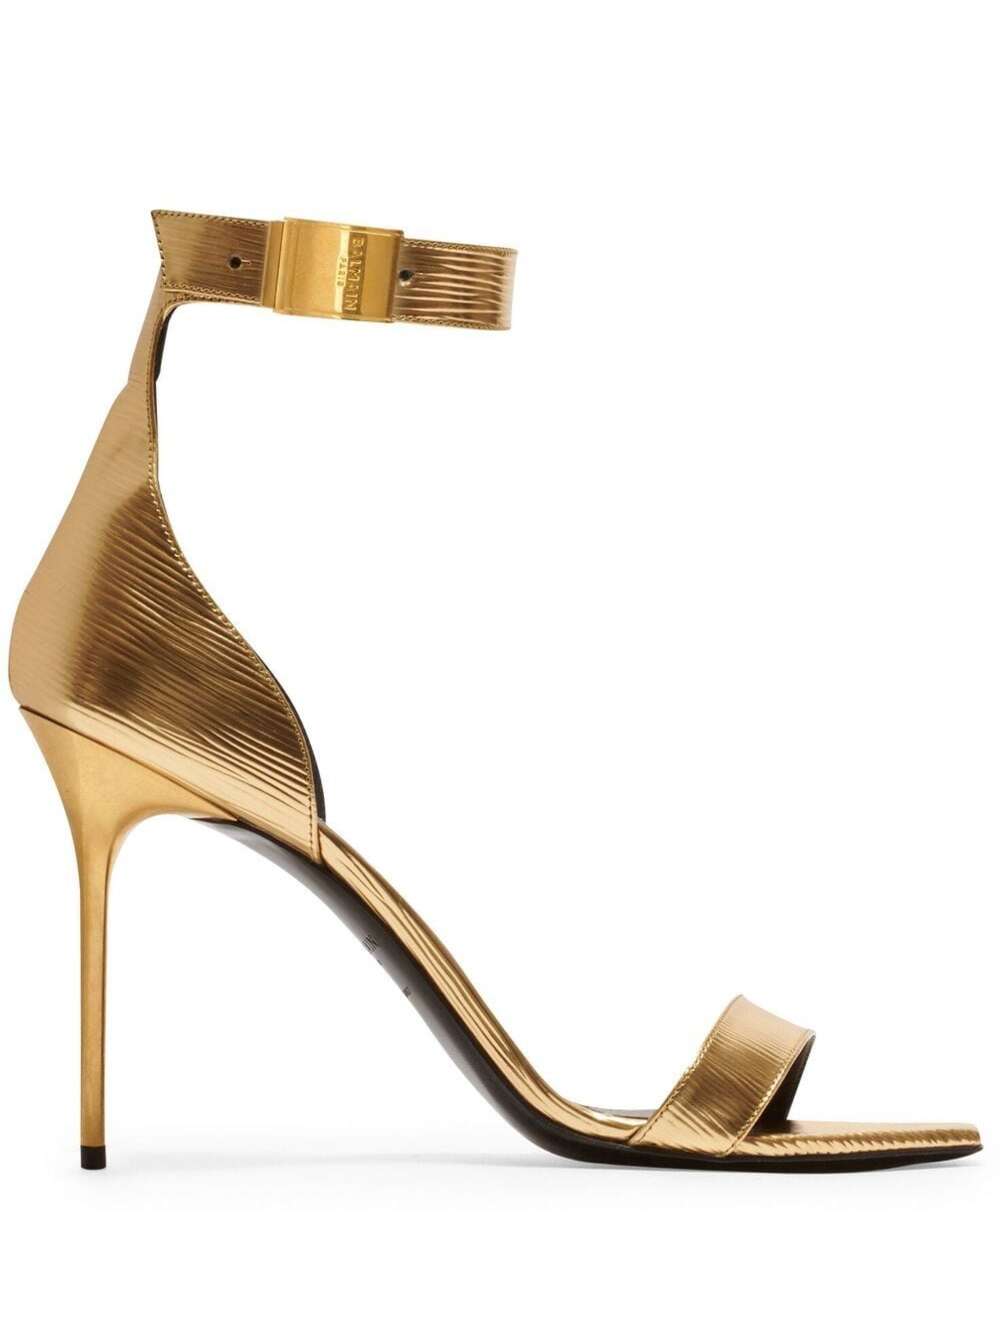 BALMAIN GOLD-COLORED SANDALS WITH LOGO AND STILETTO HEEL IN LAMINATED LEATHER WOMAN